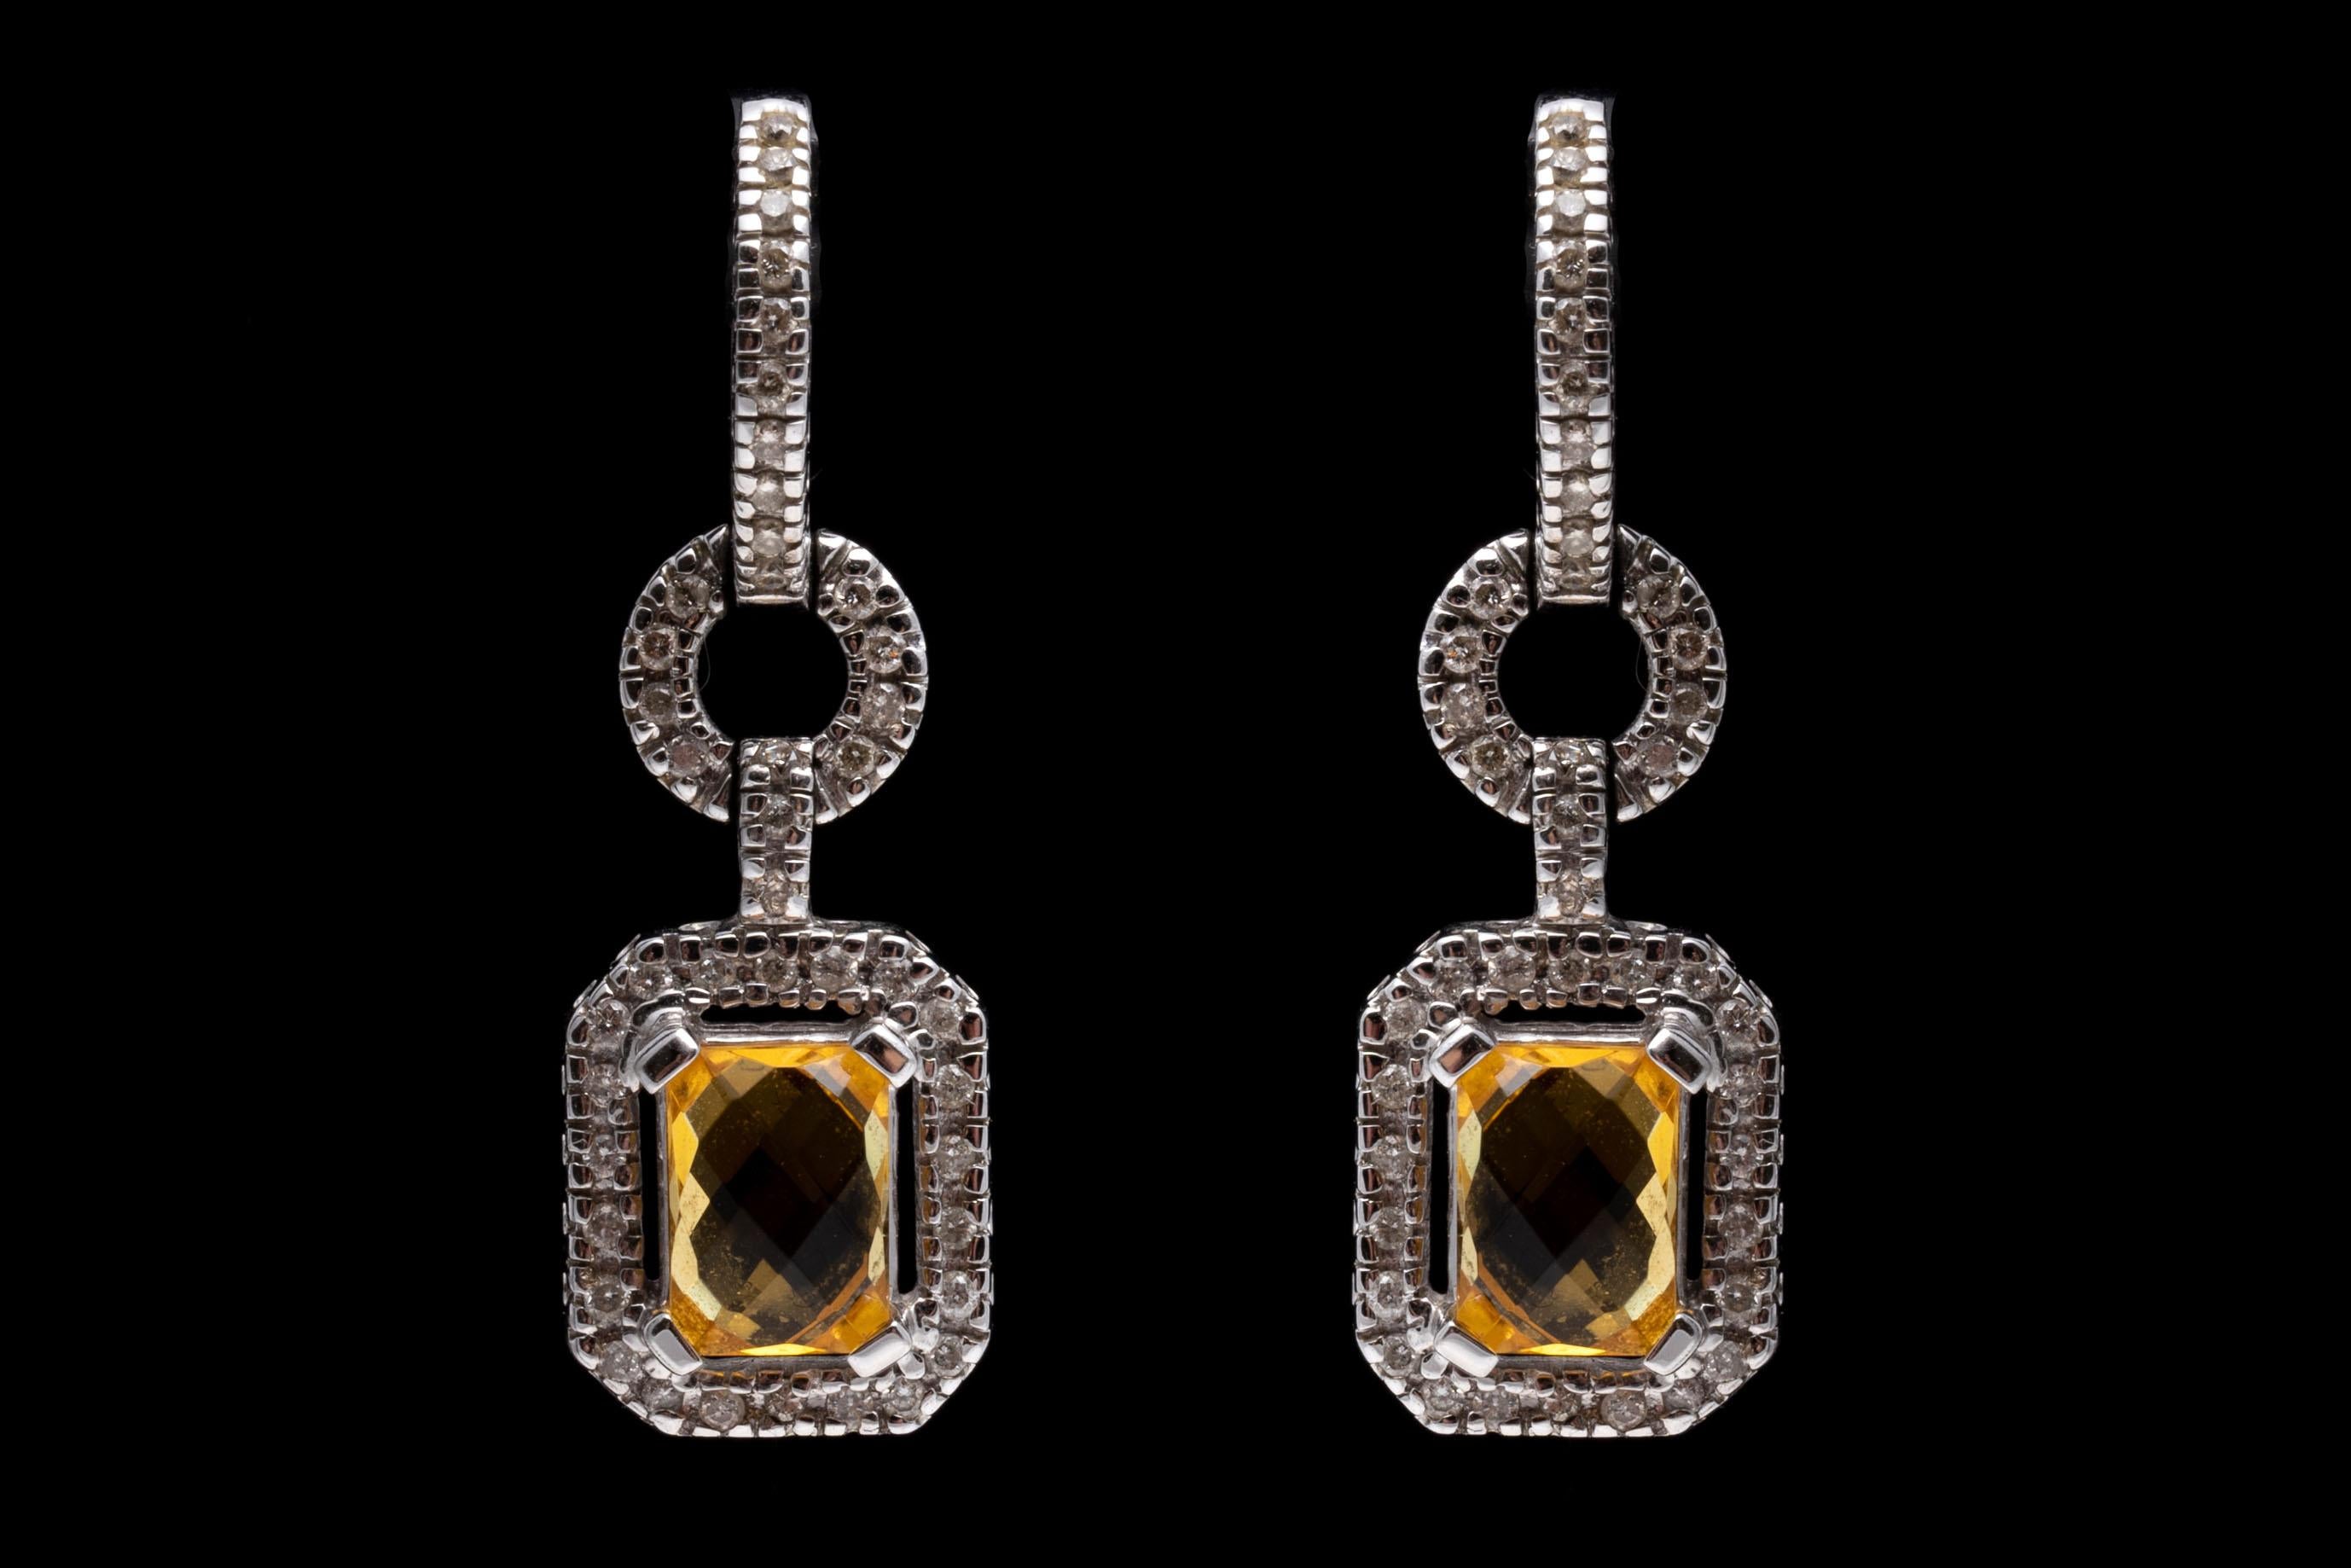 14K White Gold, Citrine And Diamond Dangle Earrings
14K white gold dangle earrings set with rectangular cut citrines displaying a light pineapple yellow. Framing the citrines are round cut diamonds. Citrines are approximately 1.45 TCW and the